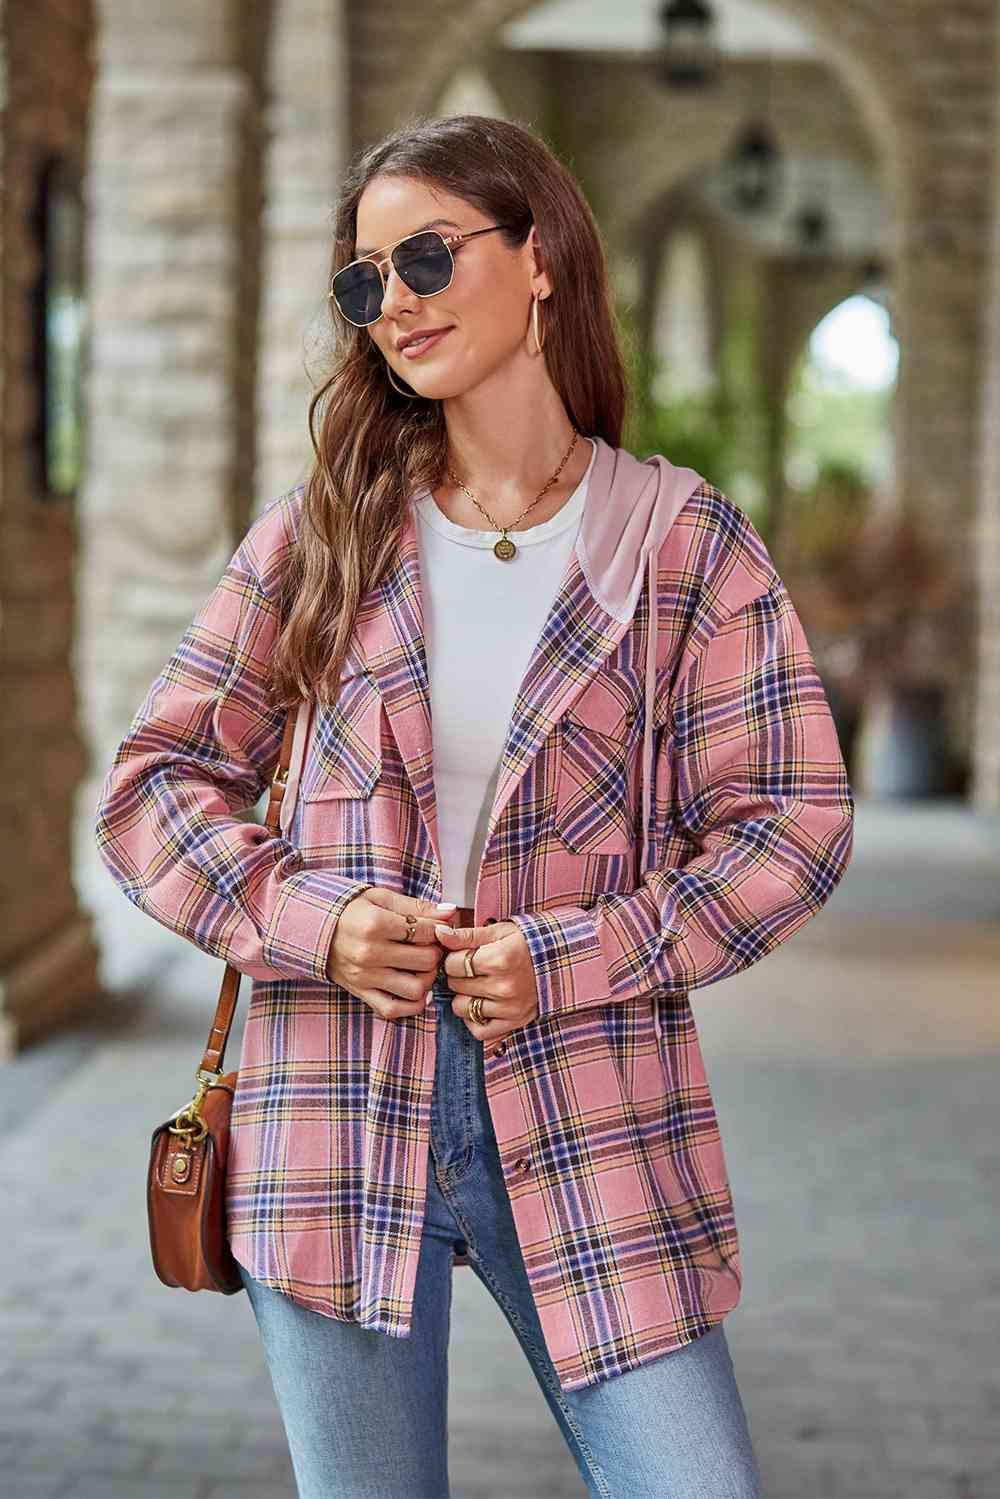 Secure In Style Plaid Hooded Jacket - MXSTUDIO.COM